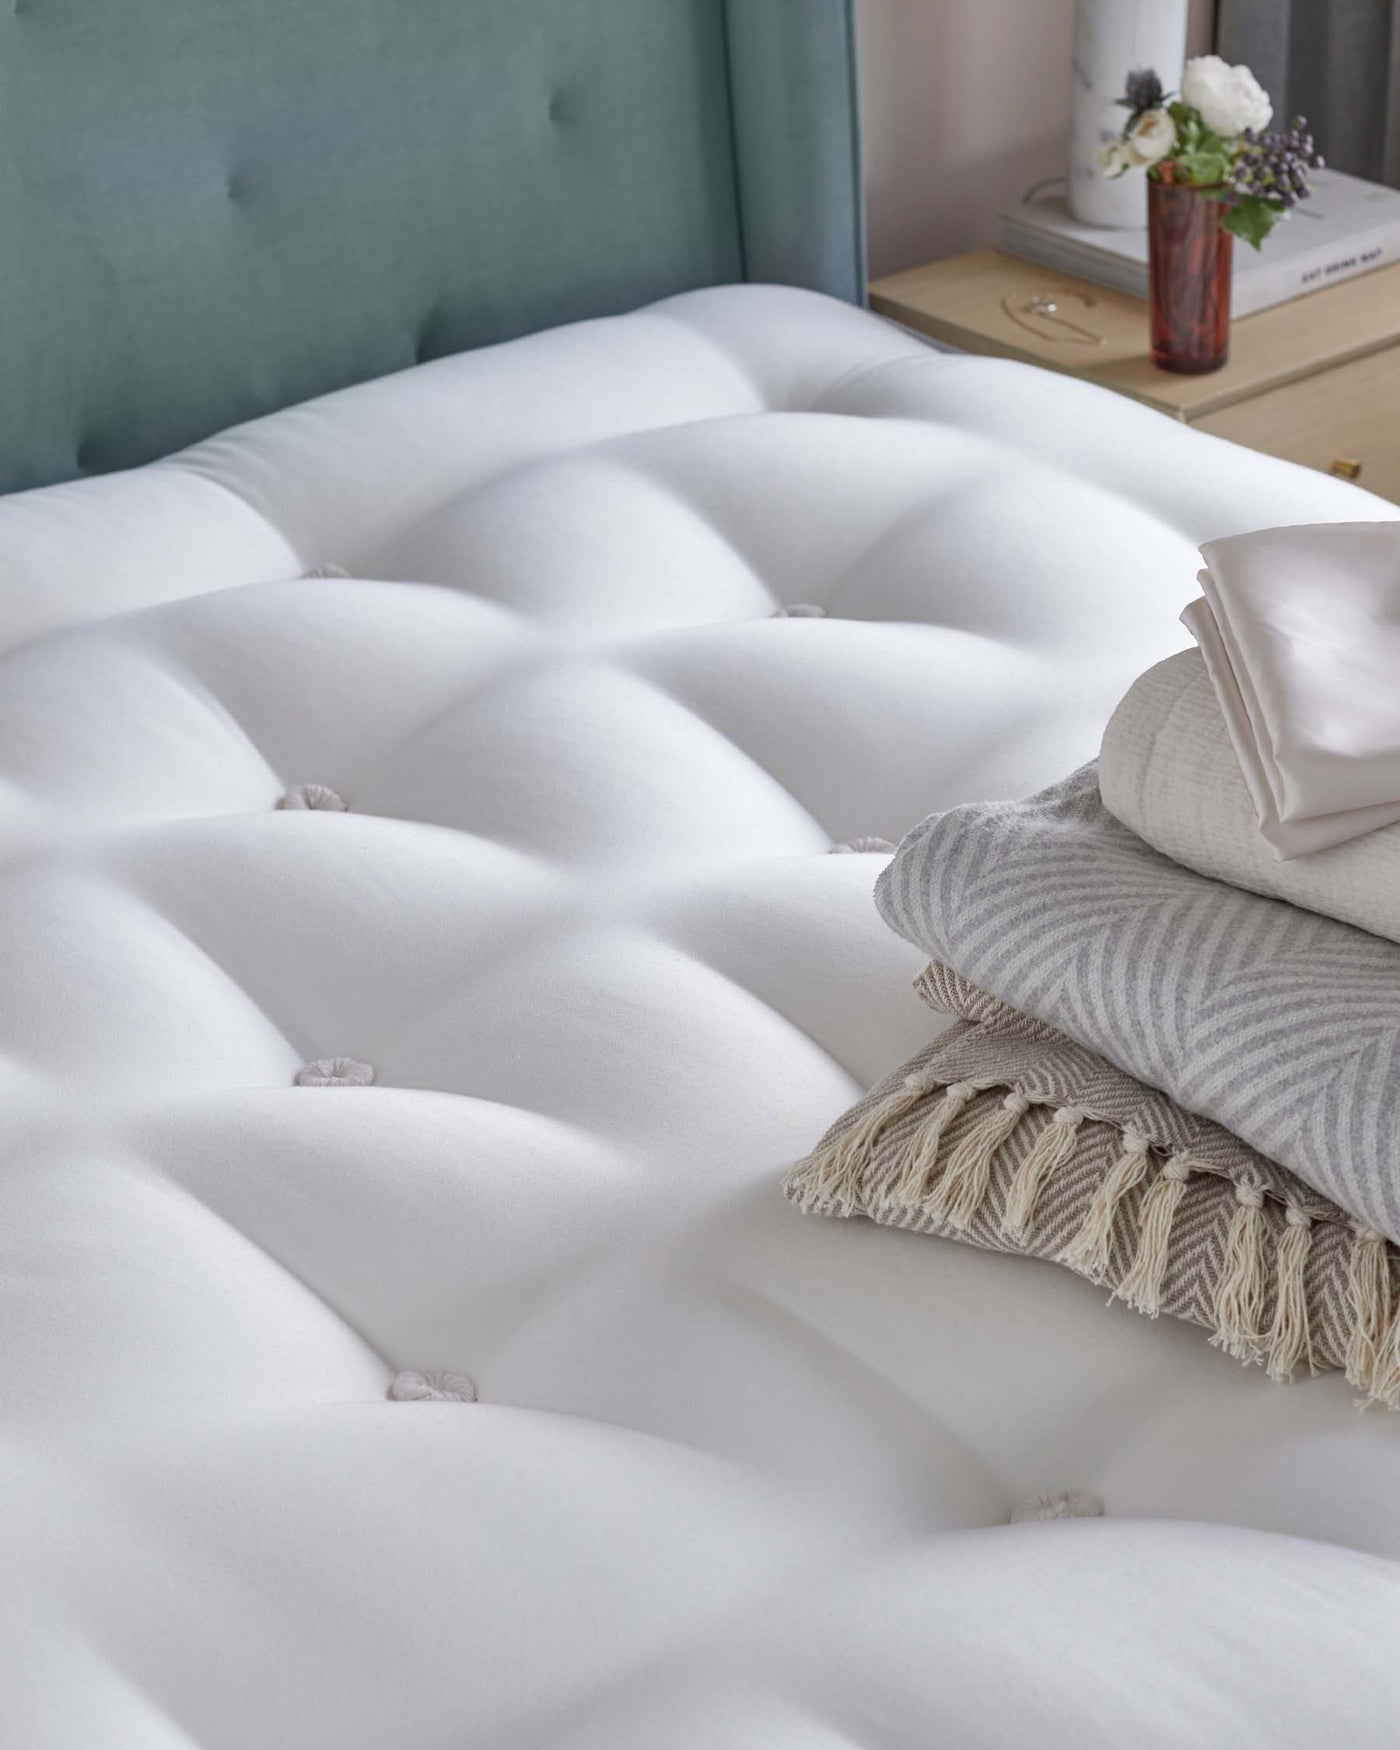 Luxurious tufted white upholstered headboard and sumptuously padded white bed, adorned with a neatly folded grey and white striped blanket with tasselled edges and soft pillows.